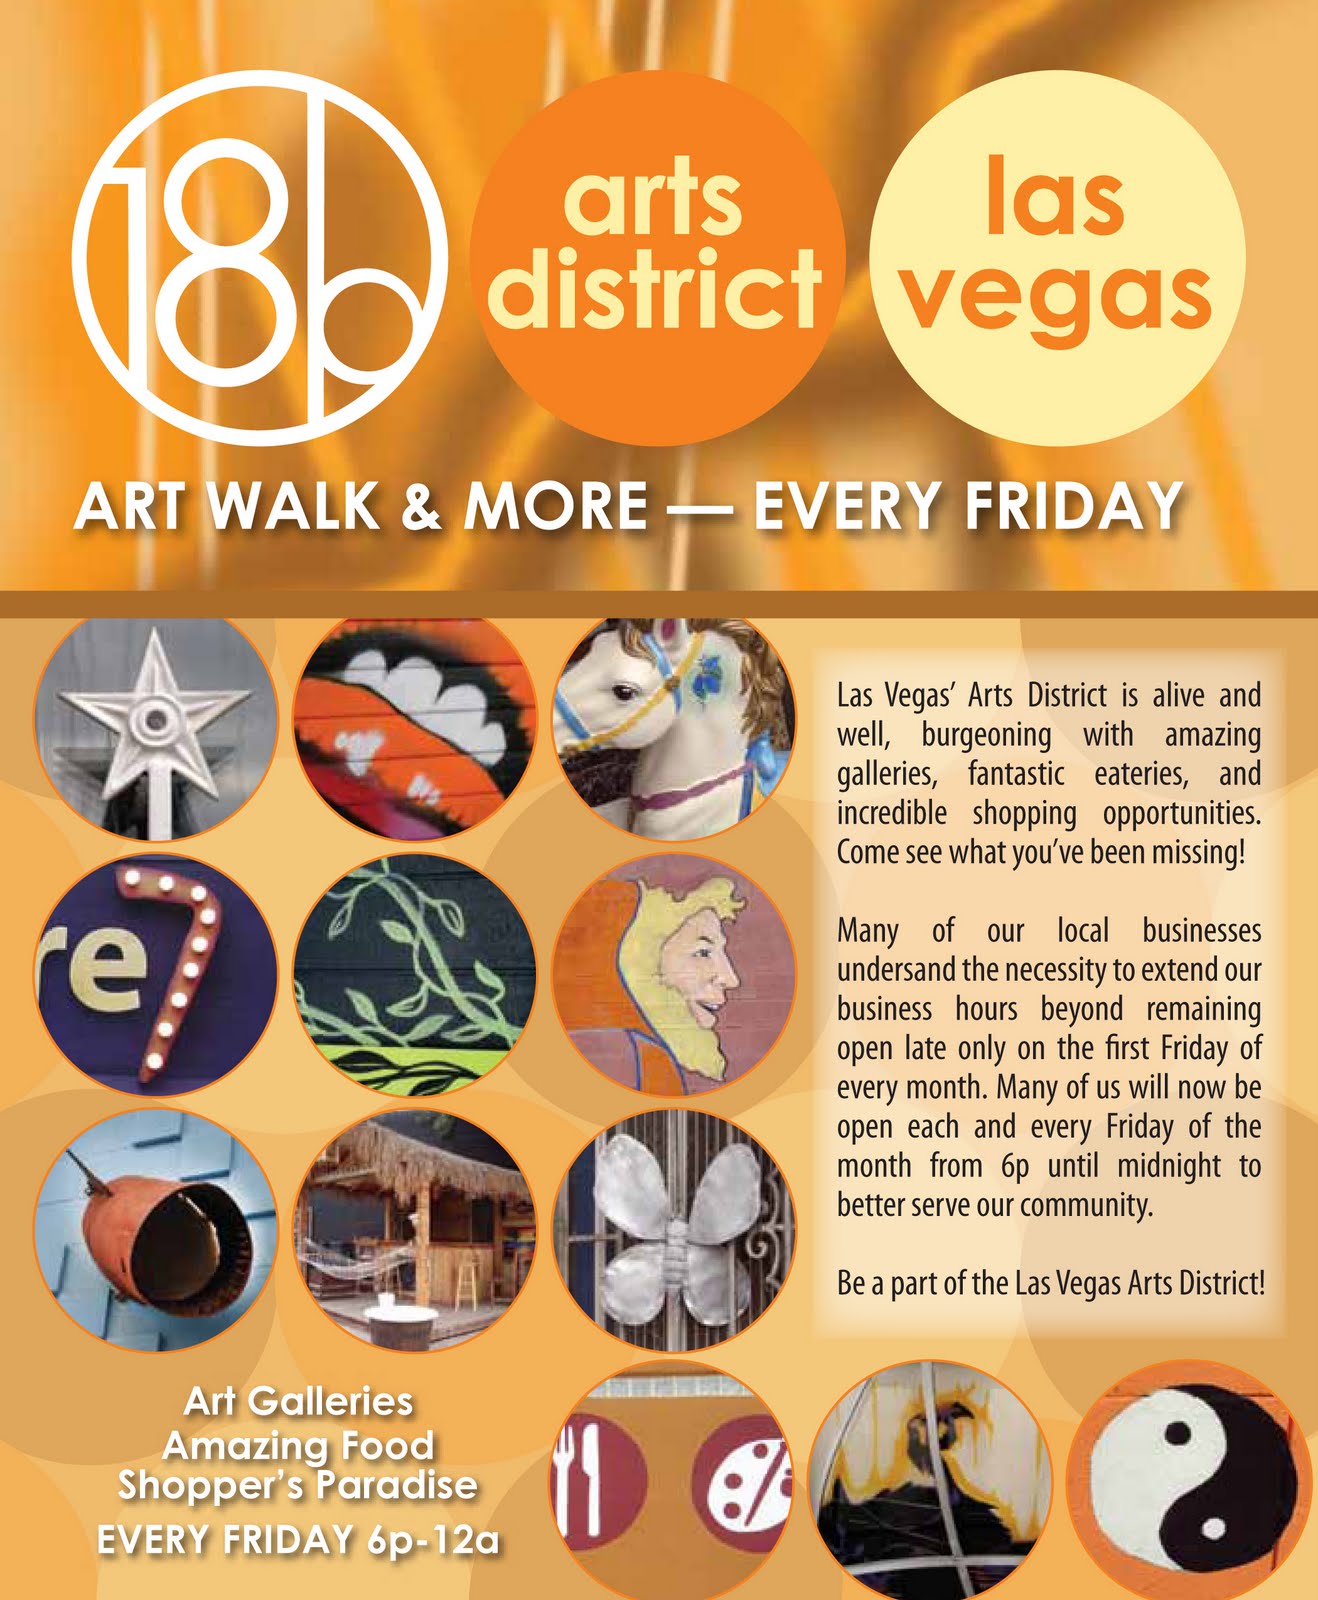 Las Vegas Arts and Culture: New arts district map ready just in time to